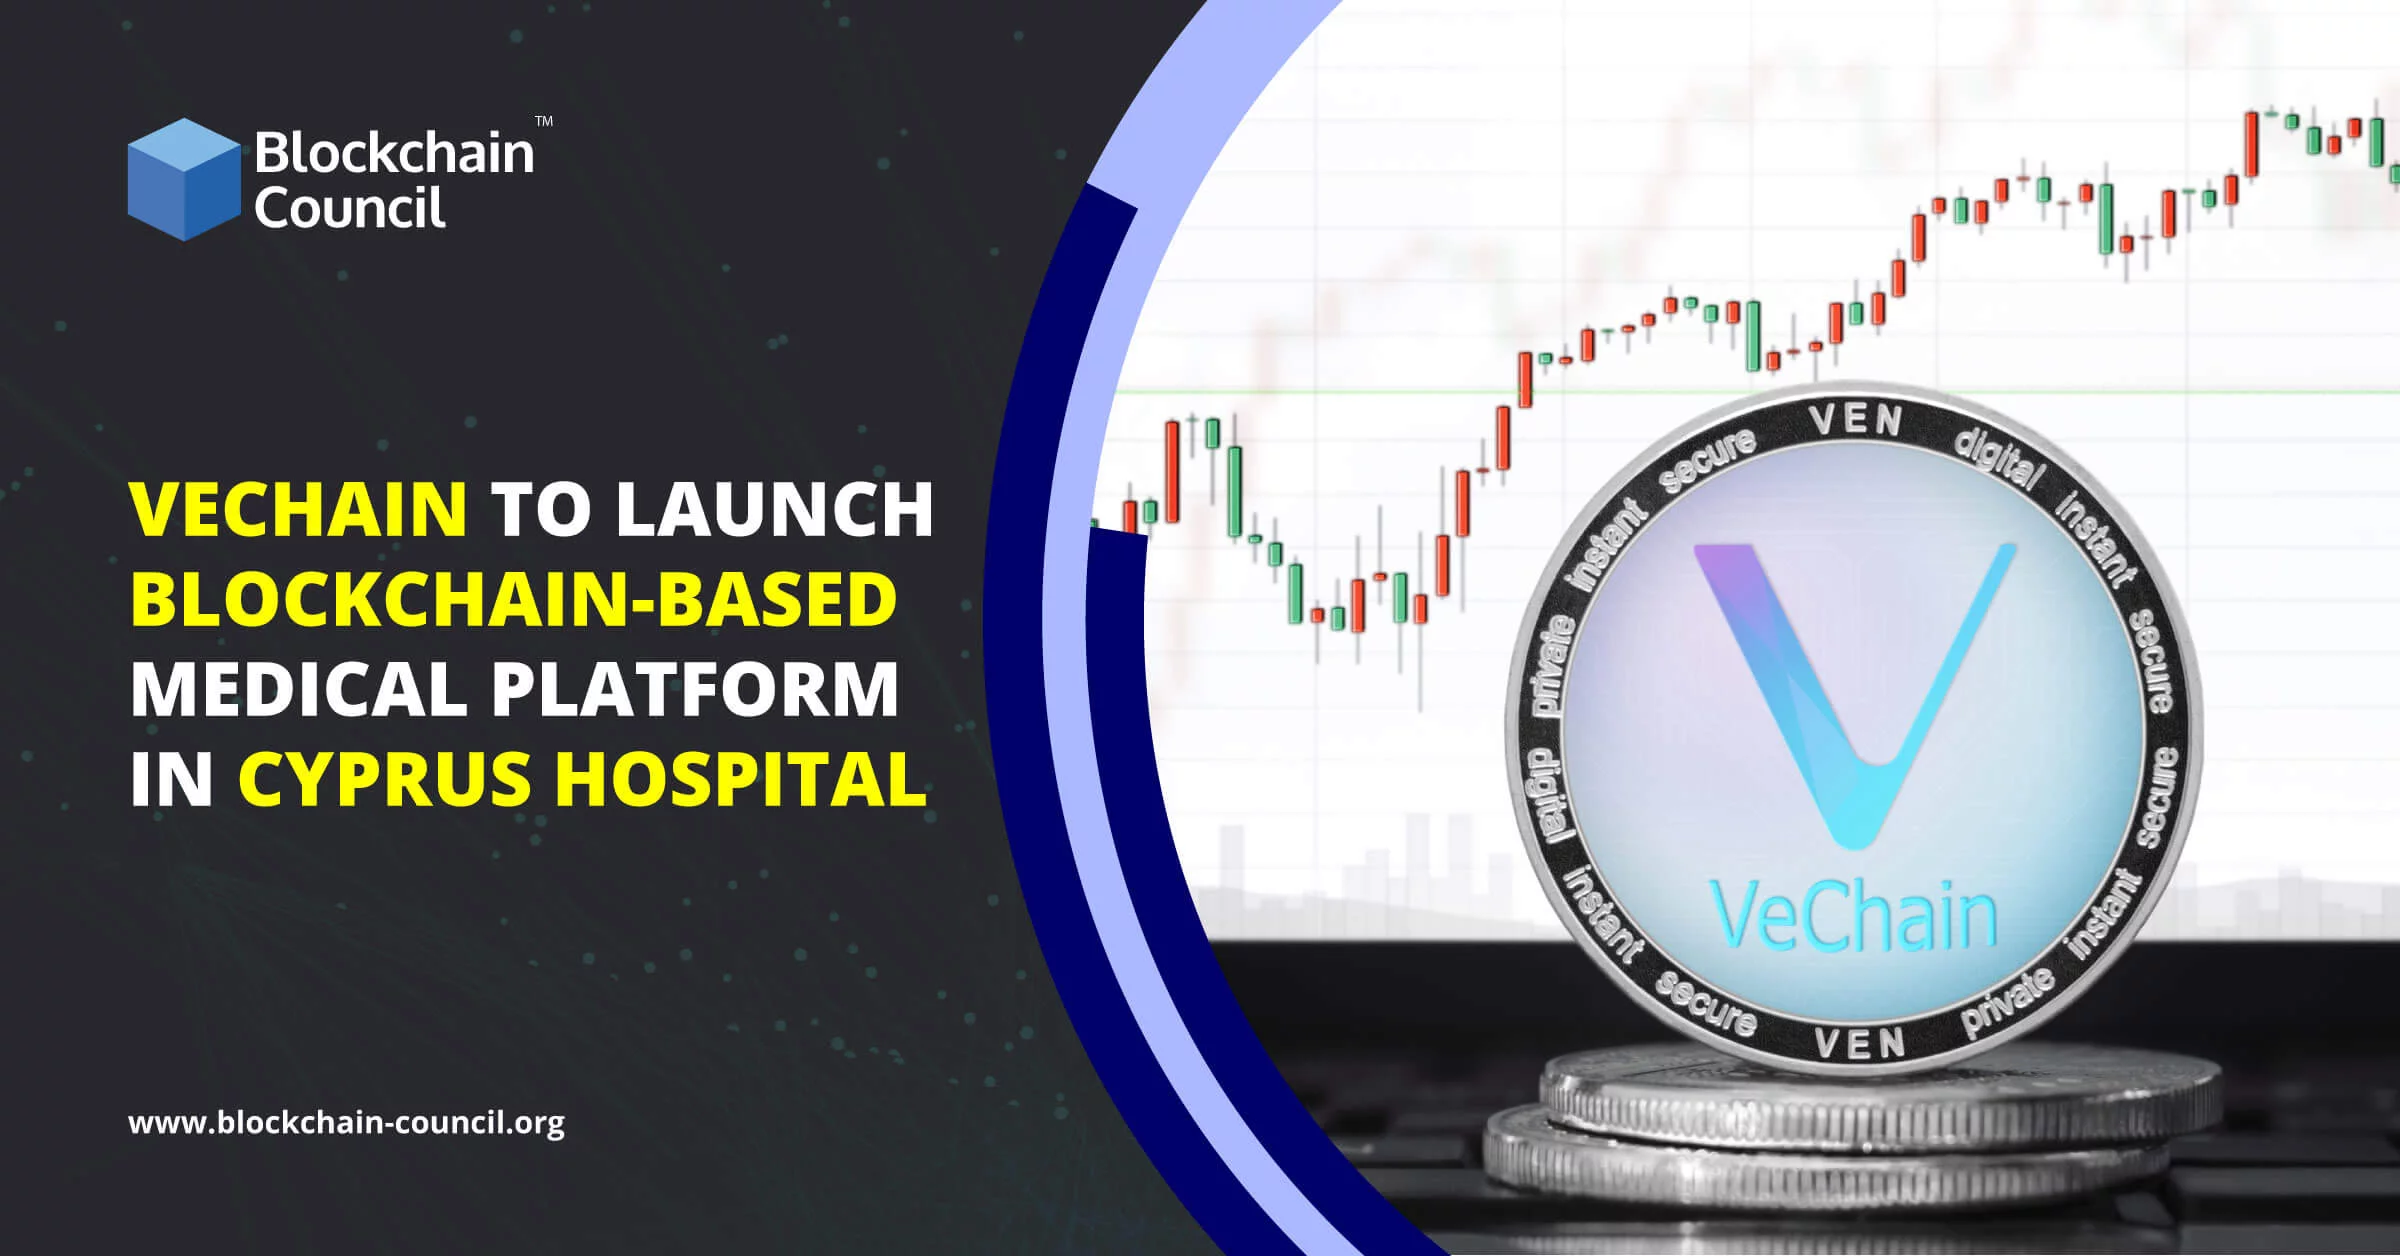 VeChain to Launch Blockchain-Based Medical Platform in Cyprus Hospital